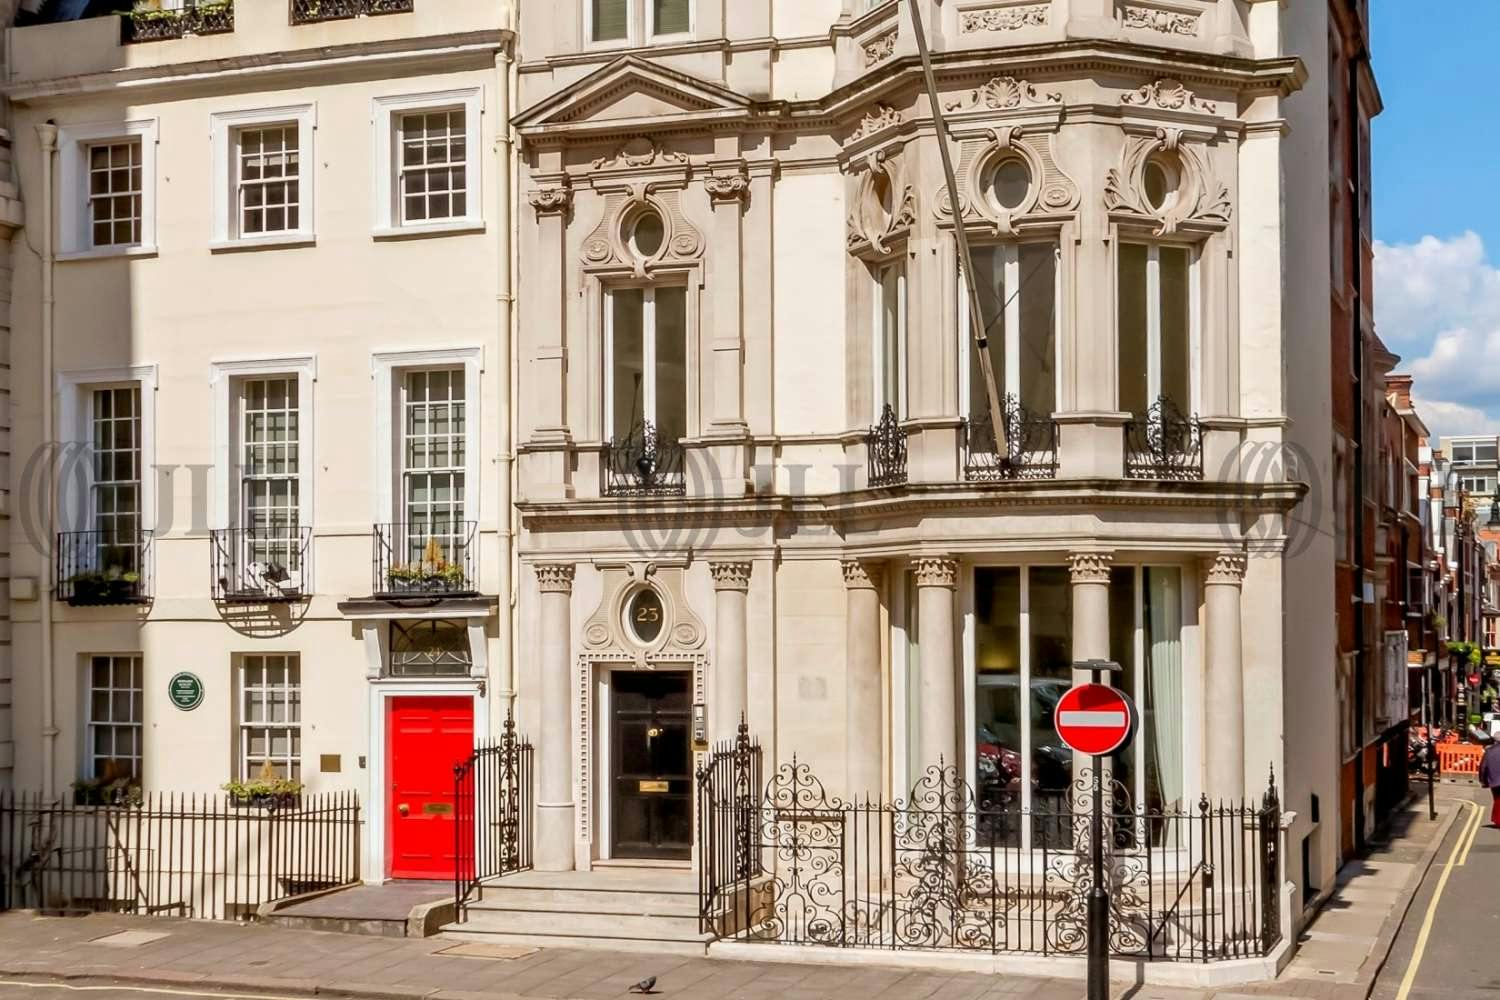 Mayfair – 11 Person Office – Berkeley Square